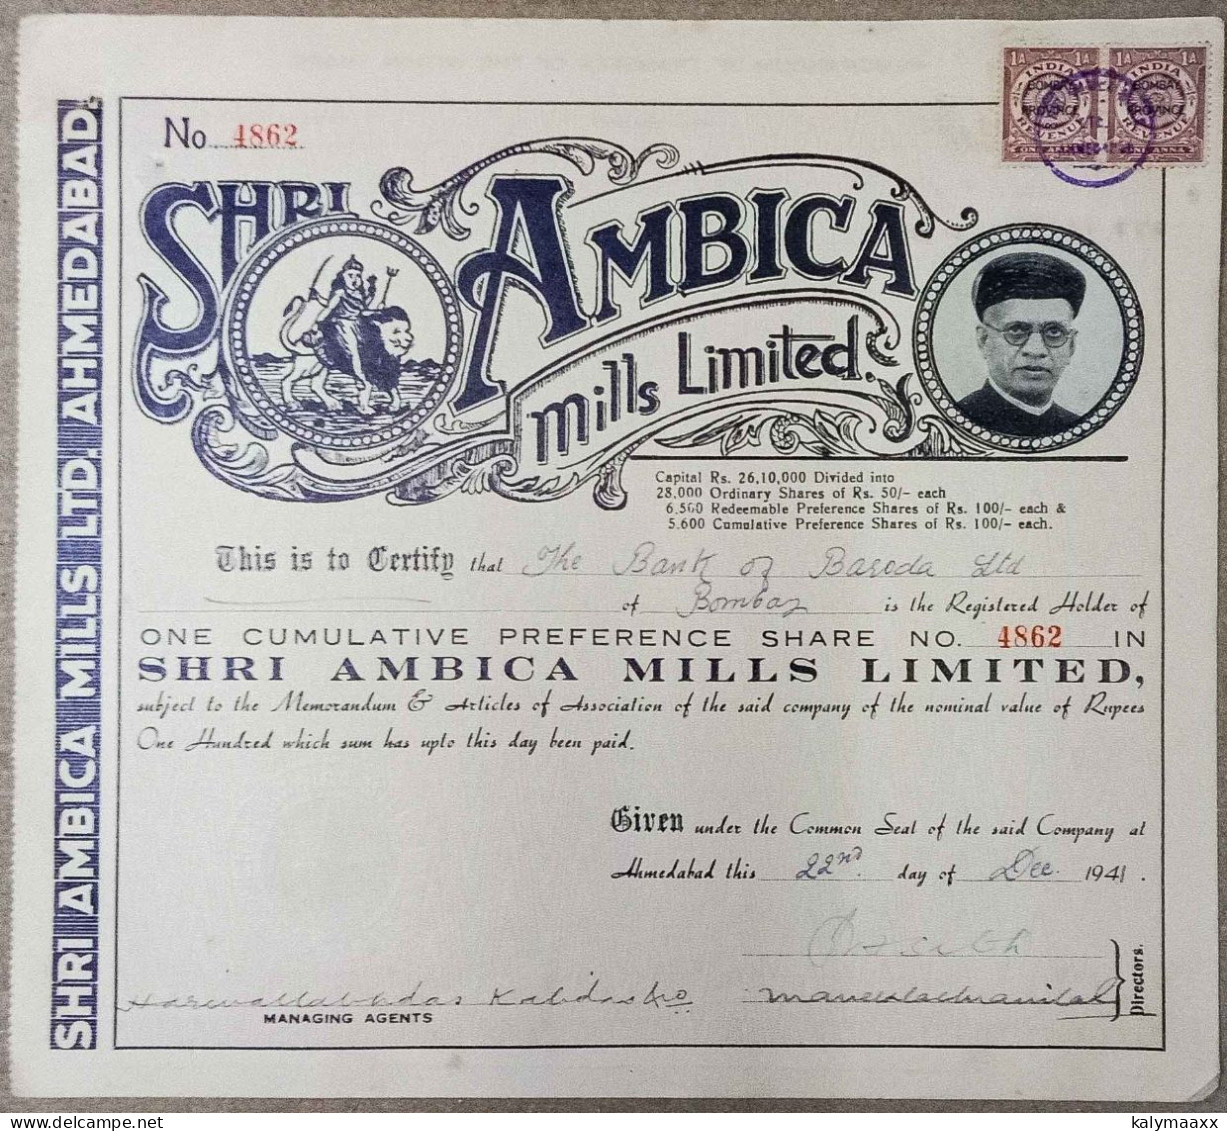 INDIA 1941 SHRI AMBICA MILLS LIMITED, TEXTILE, SPINNING, WEAVING.....SHARE CERTIFICATE - Textil